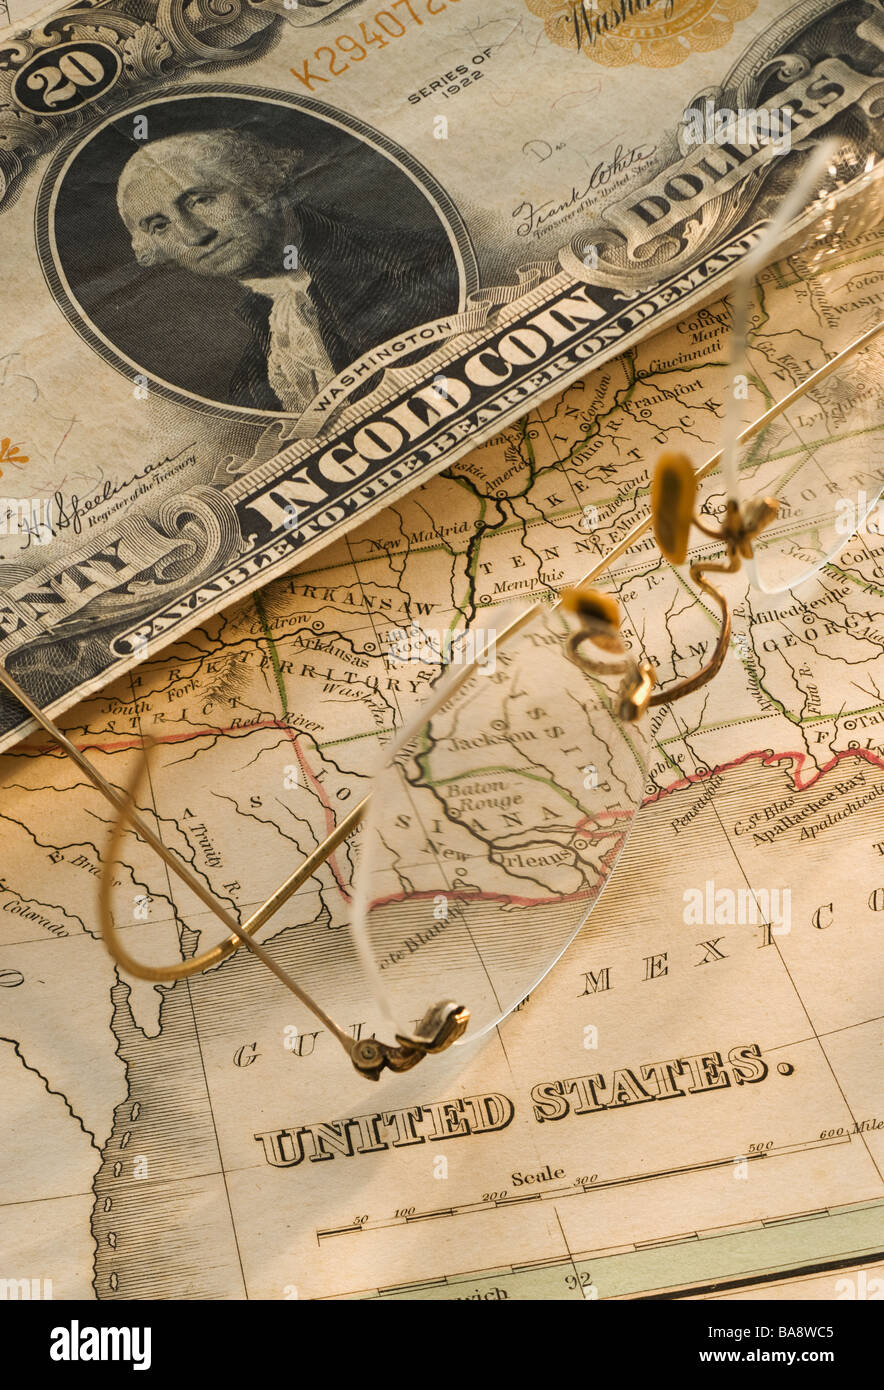 Antique map and dollar bill Stock Photo